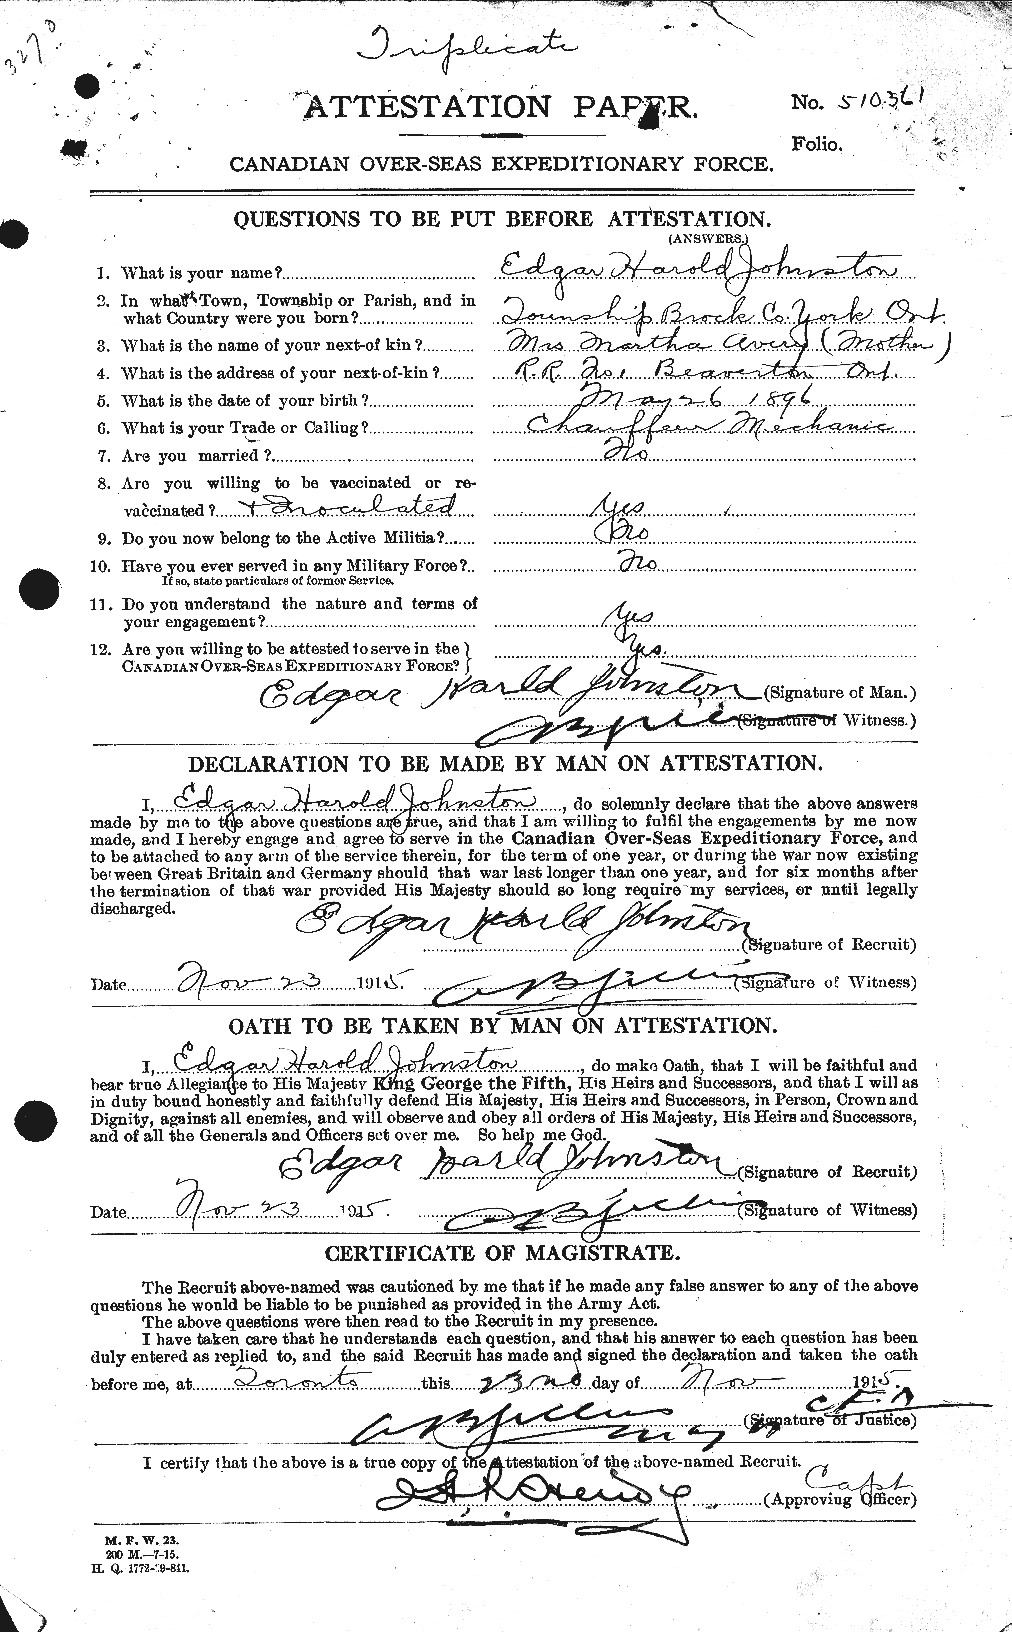 Personnel Records of the First World War - CEF 423205a